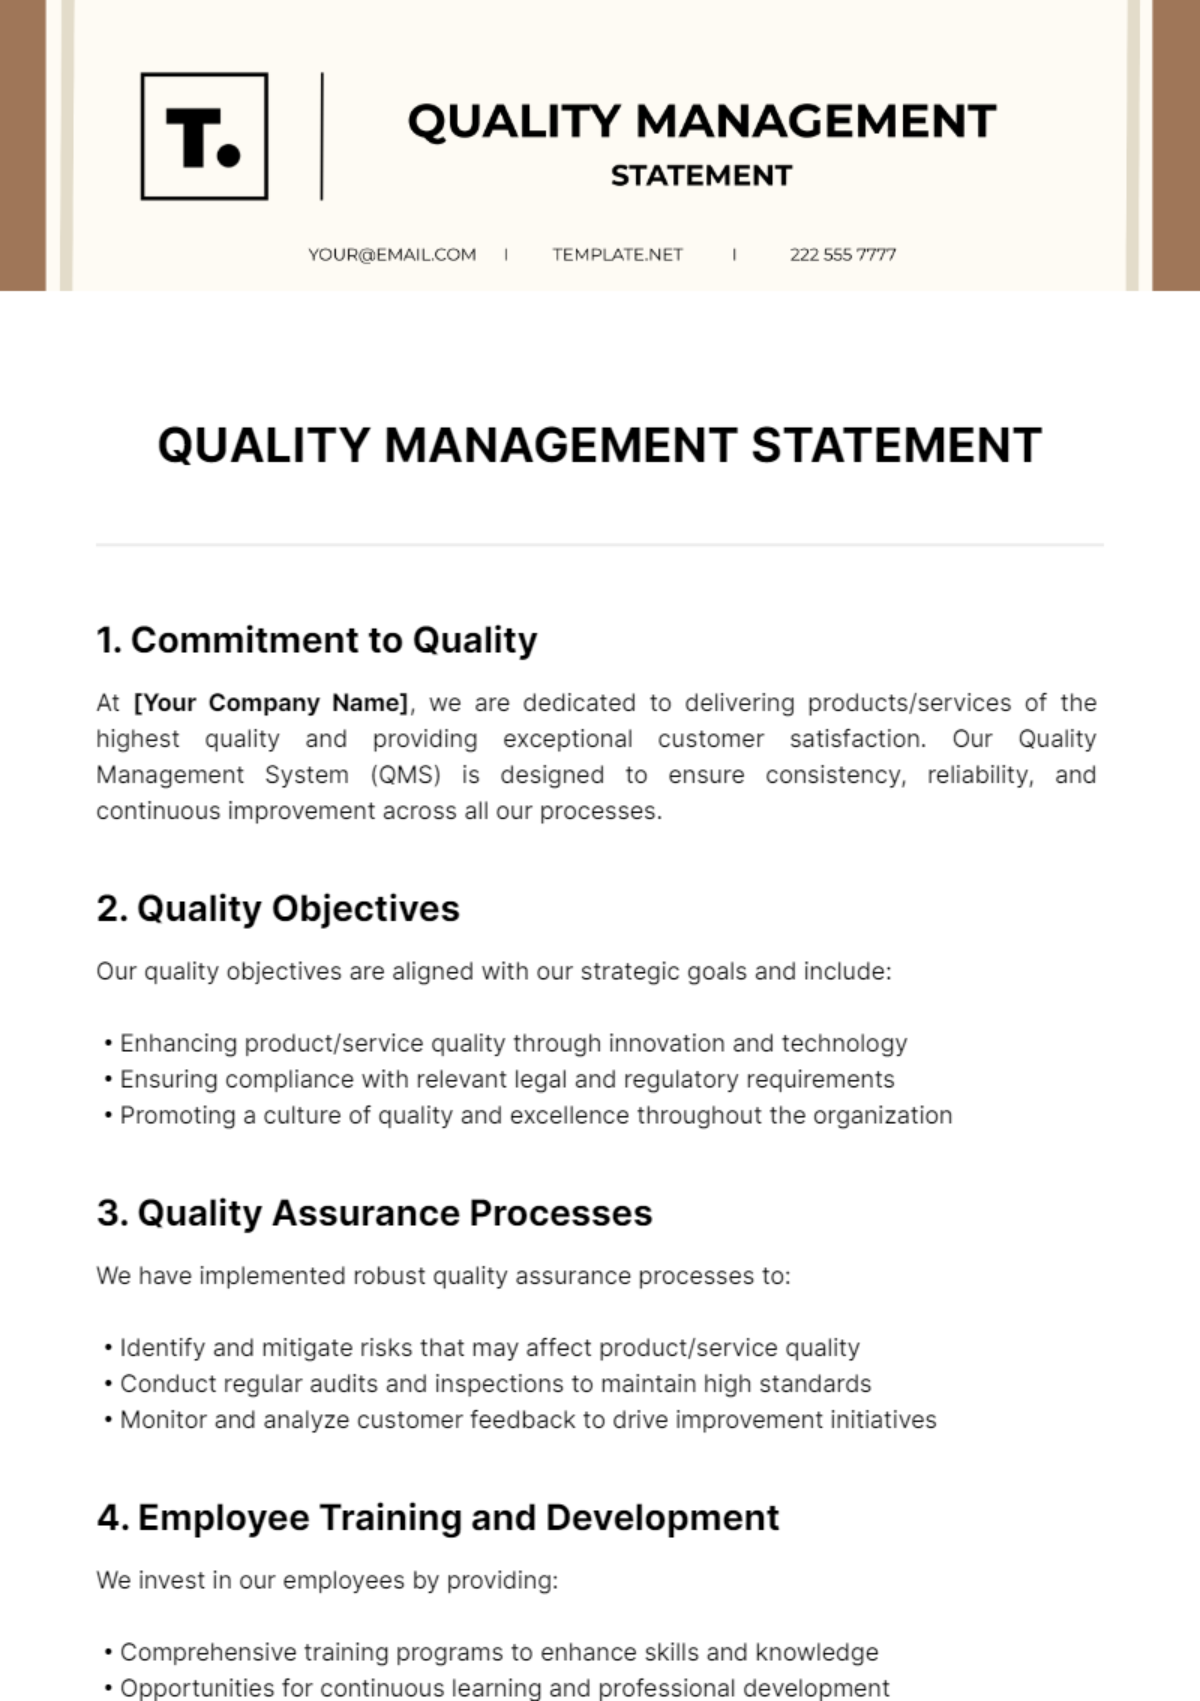 Quality Management Statement Template